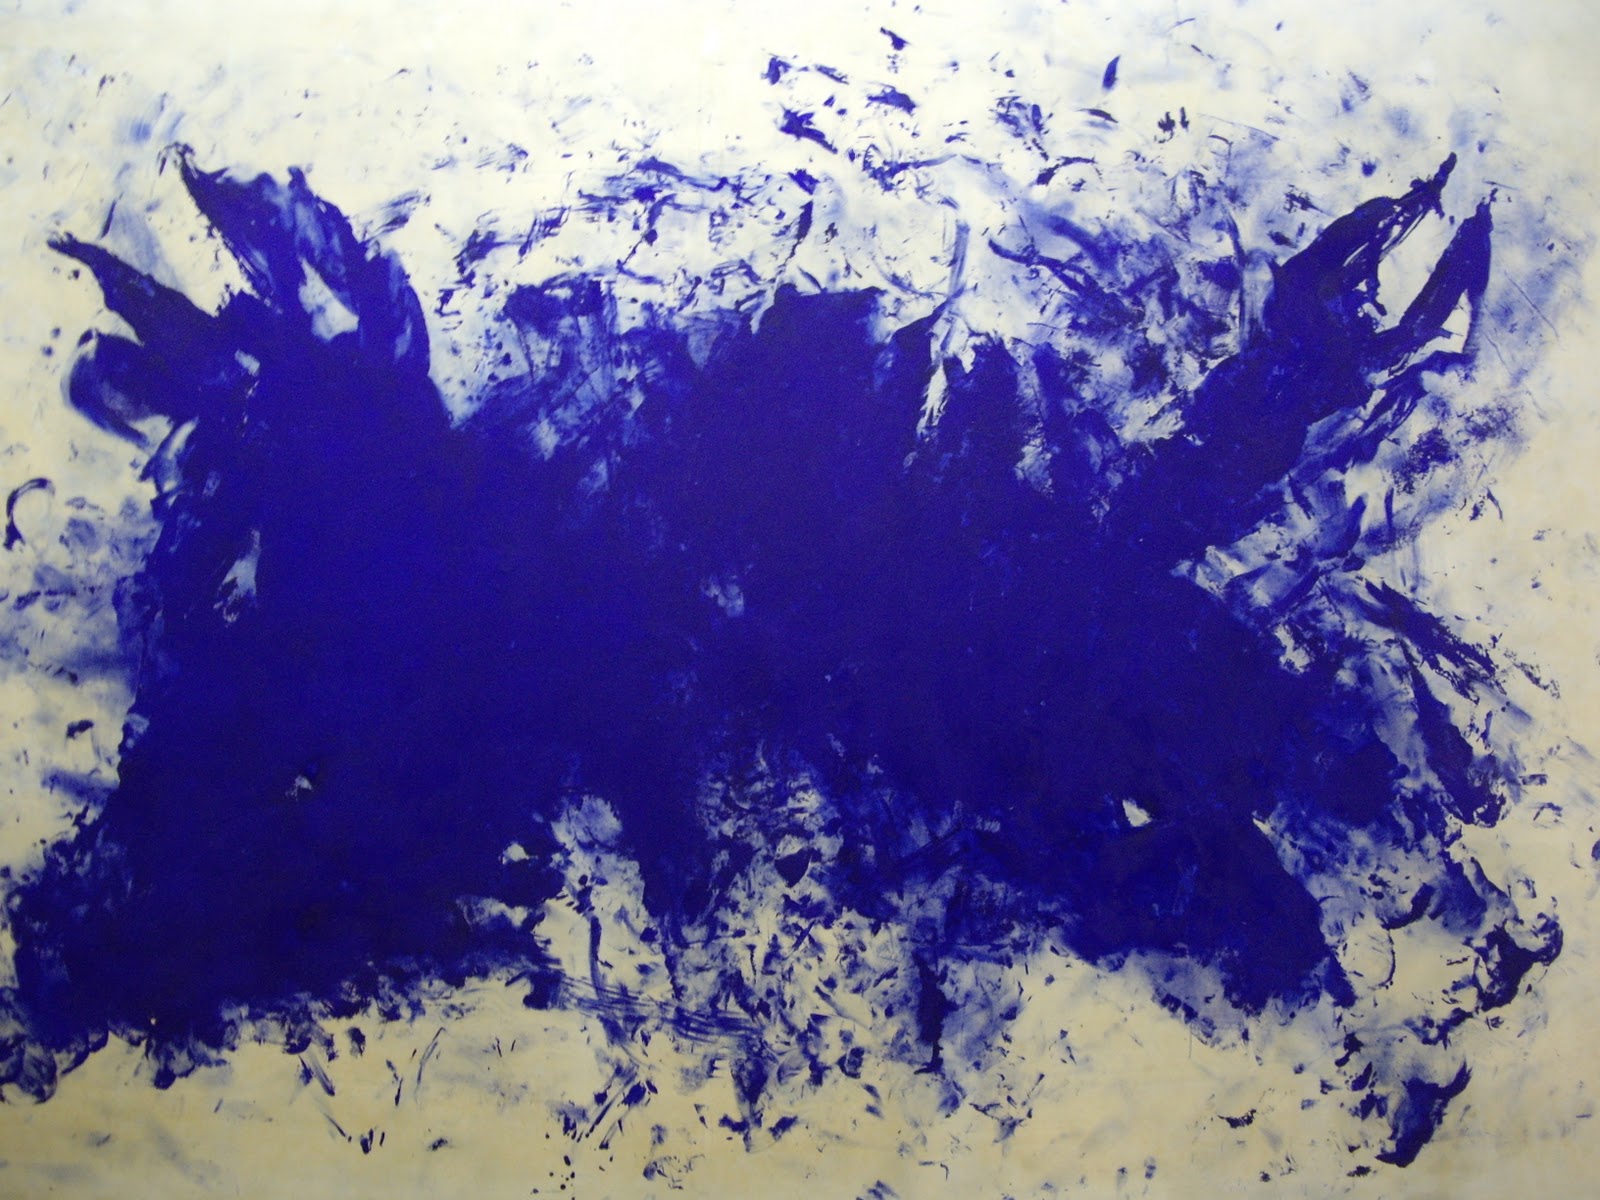 Grande Canibalismo Azul, Tributo a Tennessee Williams by Yves Klein - 1960 - 276 x 418 cm 